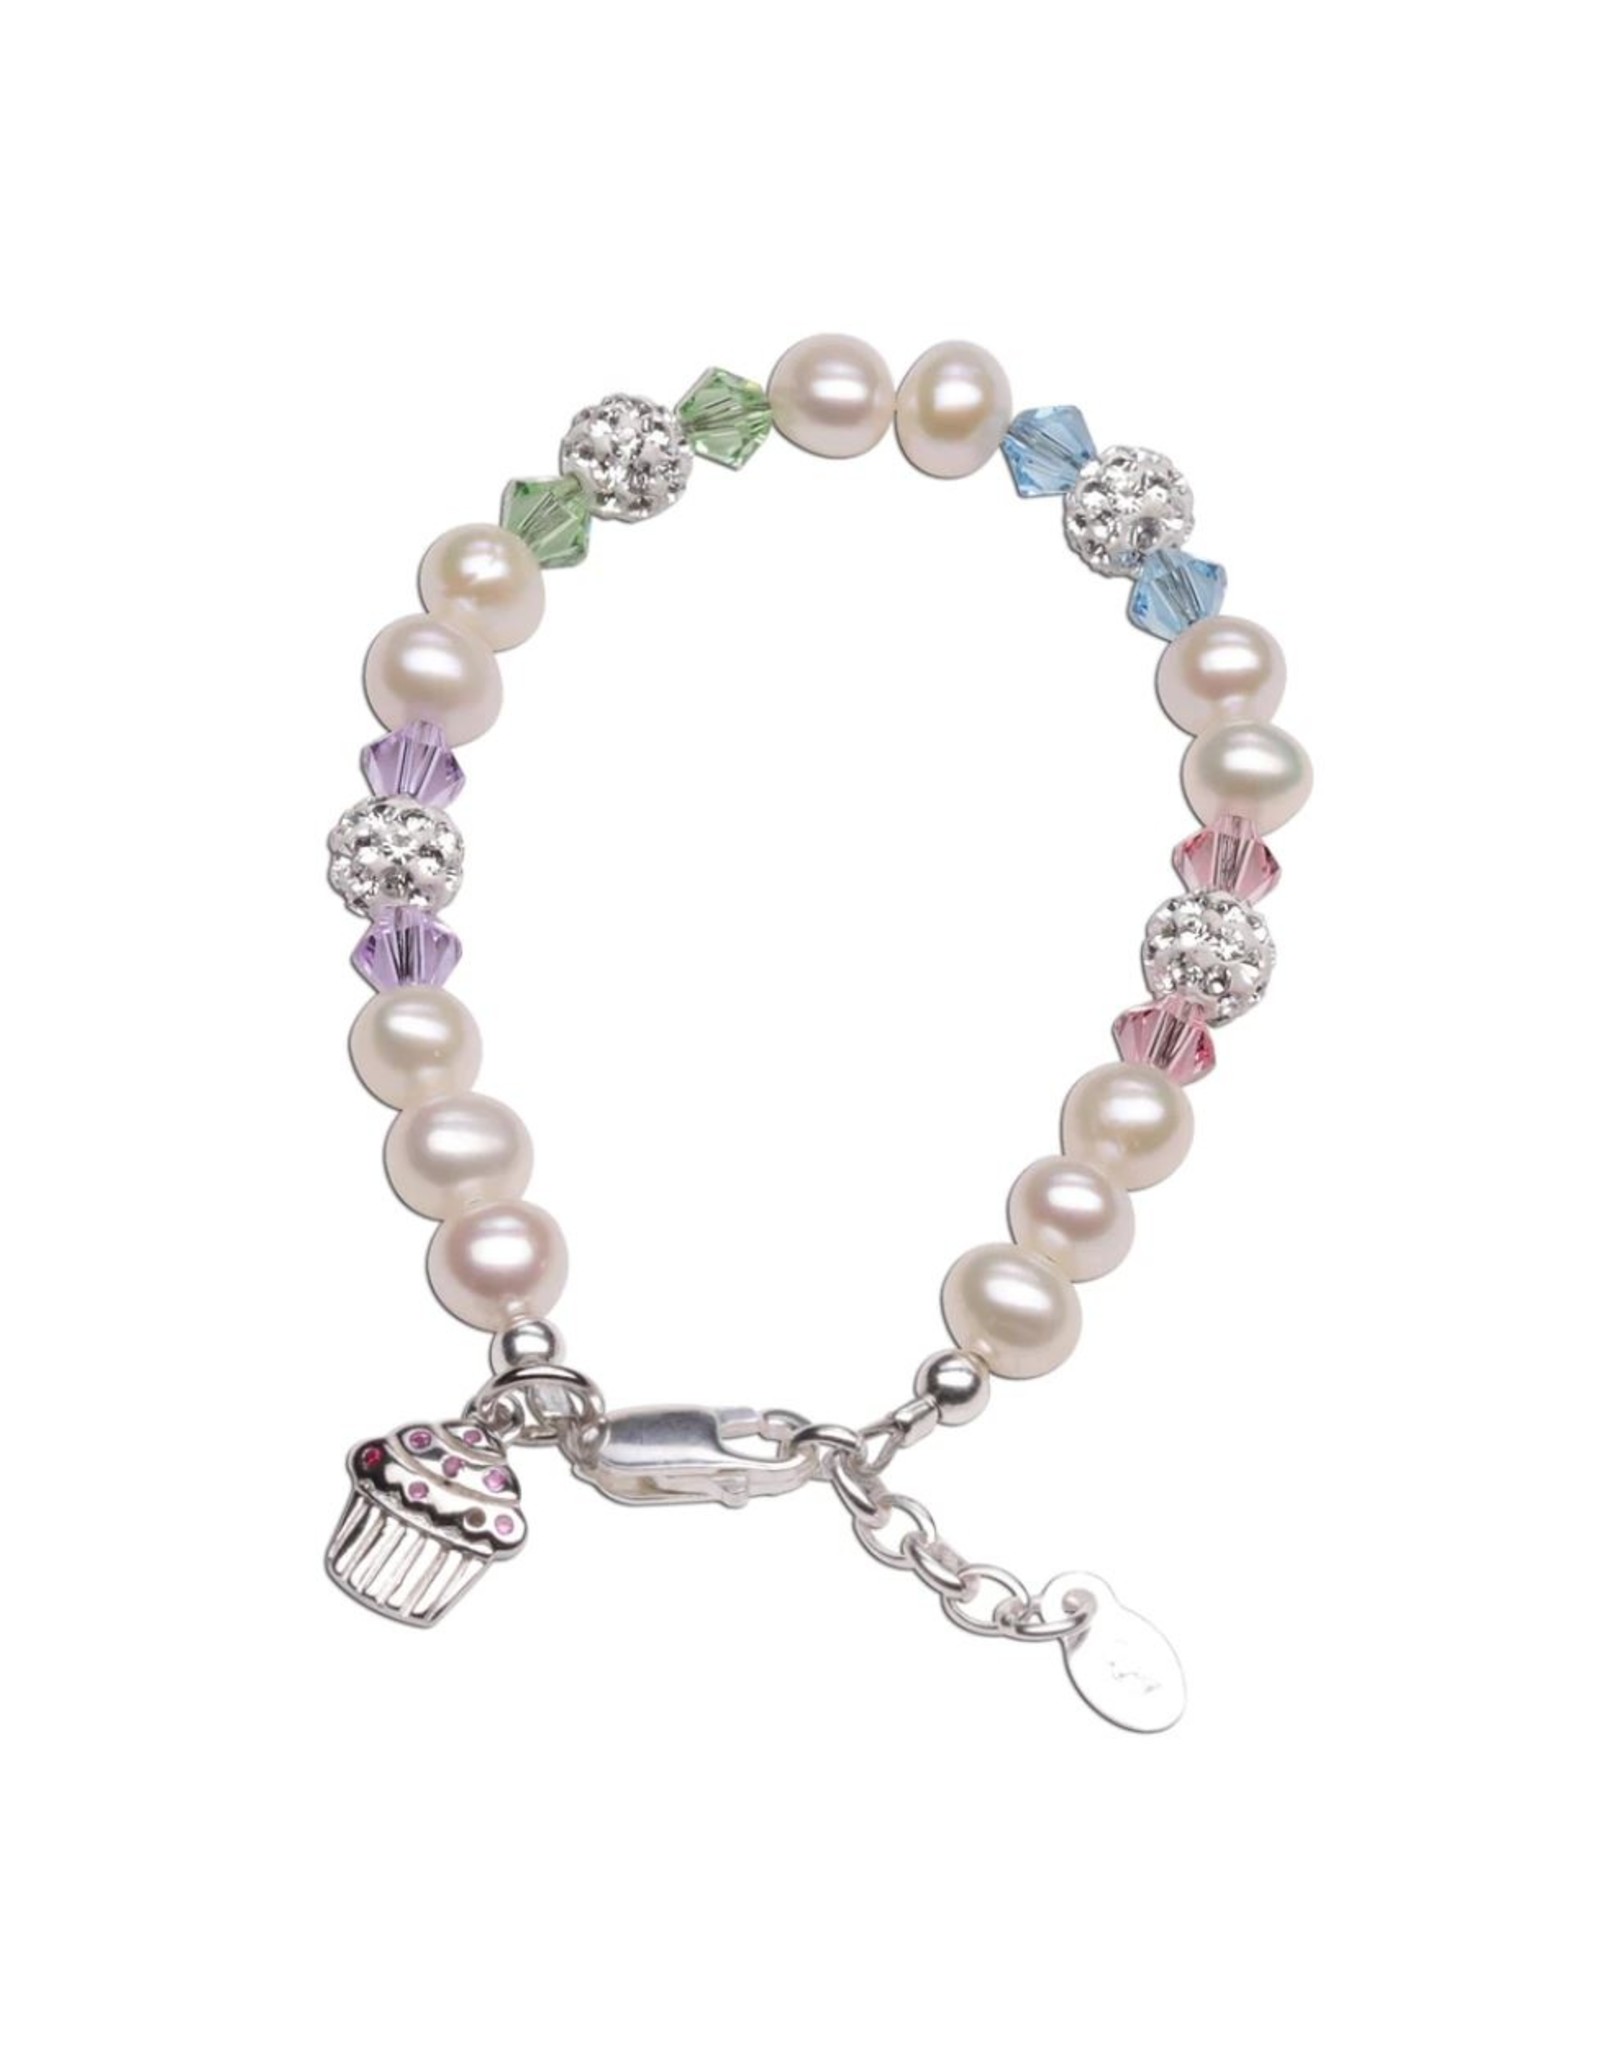 Cherished Moments Sweet Cupcake Sterling Silver Swarovski Pearl Bracelet with Cupcake Charm